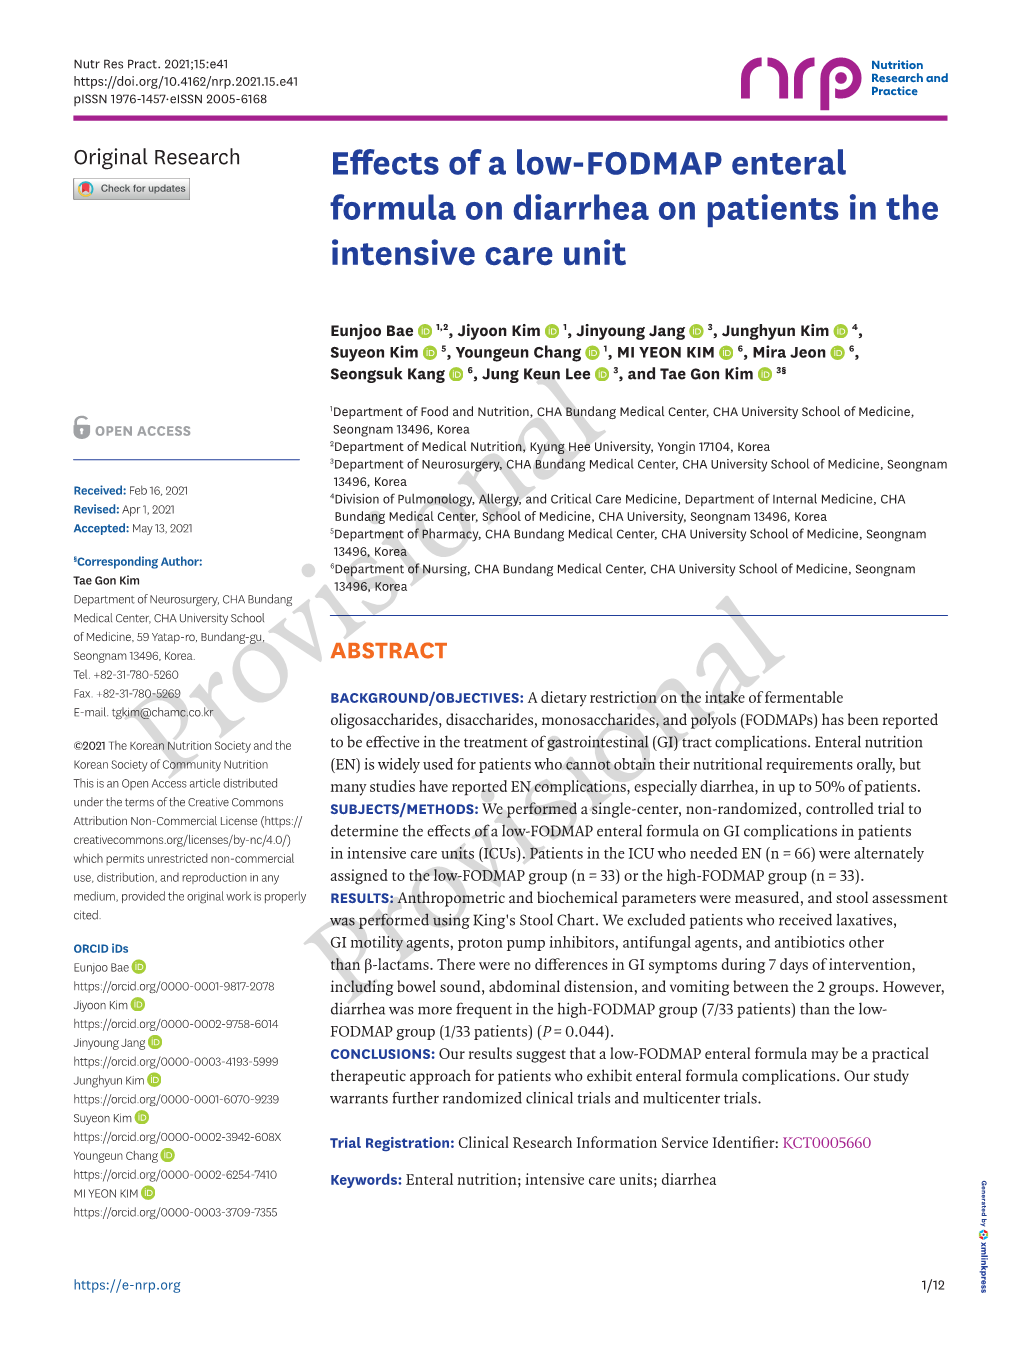 Effects of a Low-FODMAP Enteral Formula on Diarrhea on Patients in the Intensive Care Unit